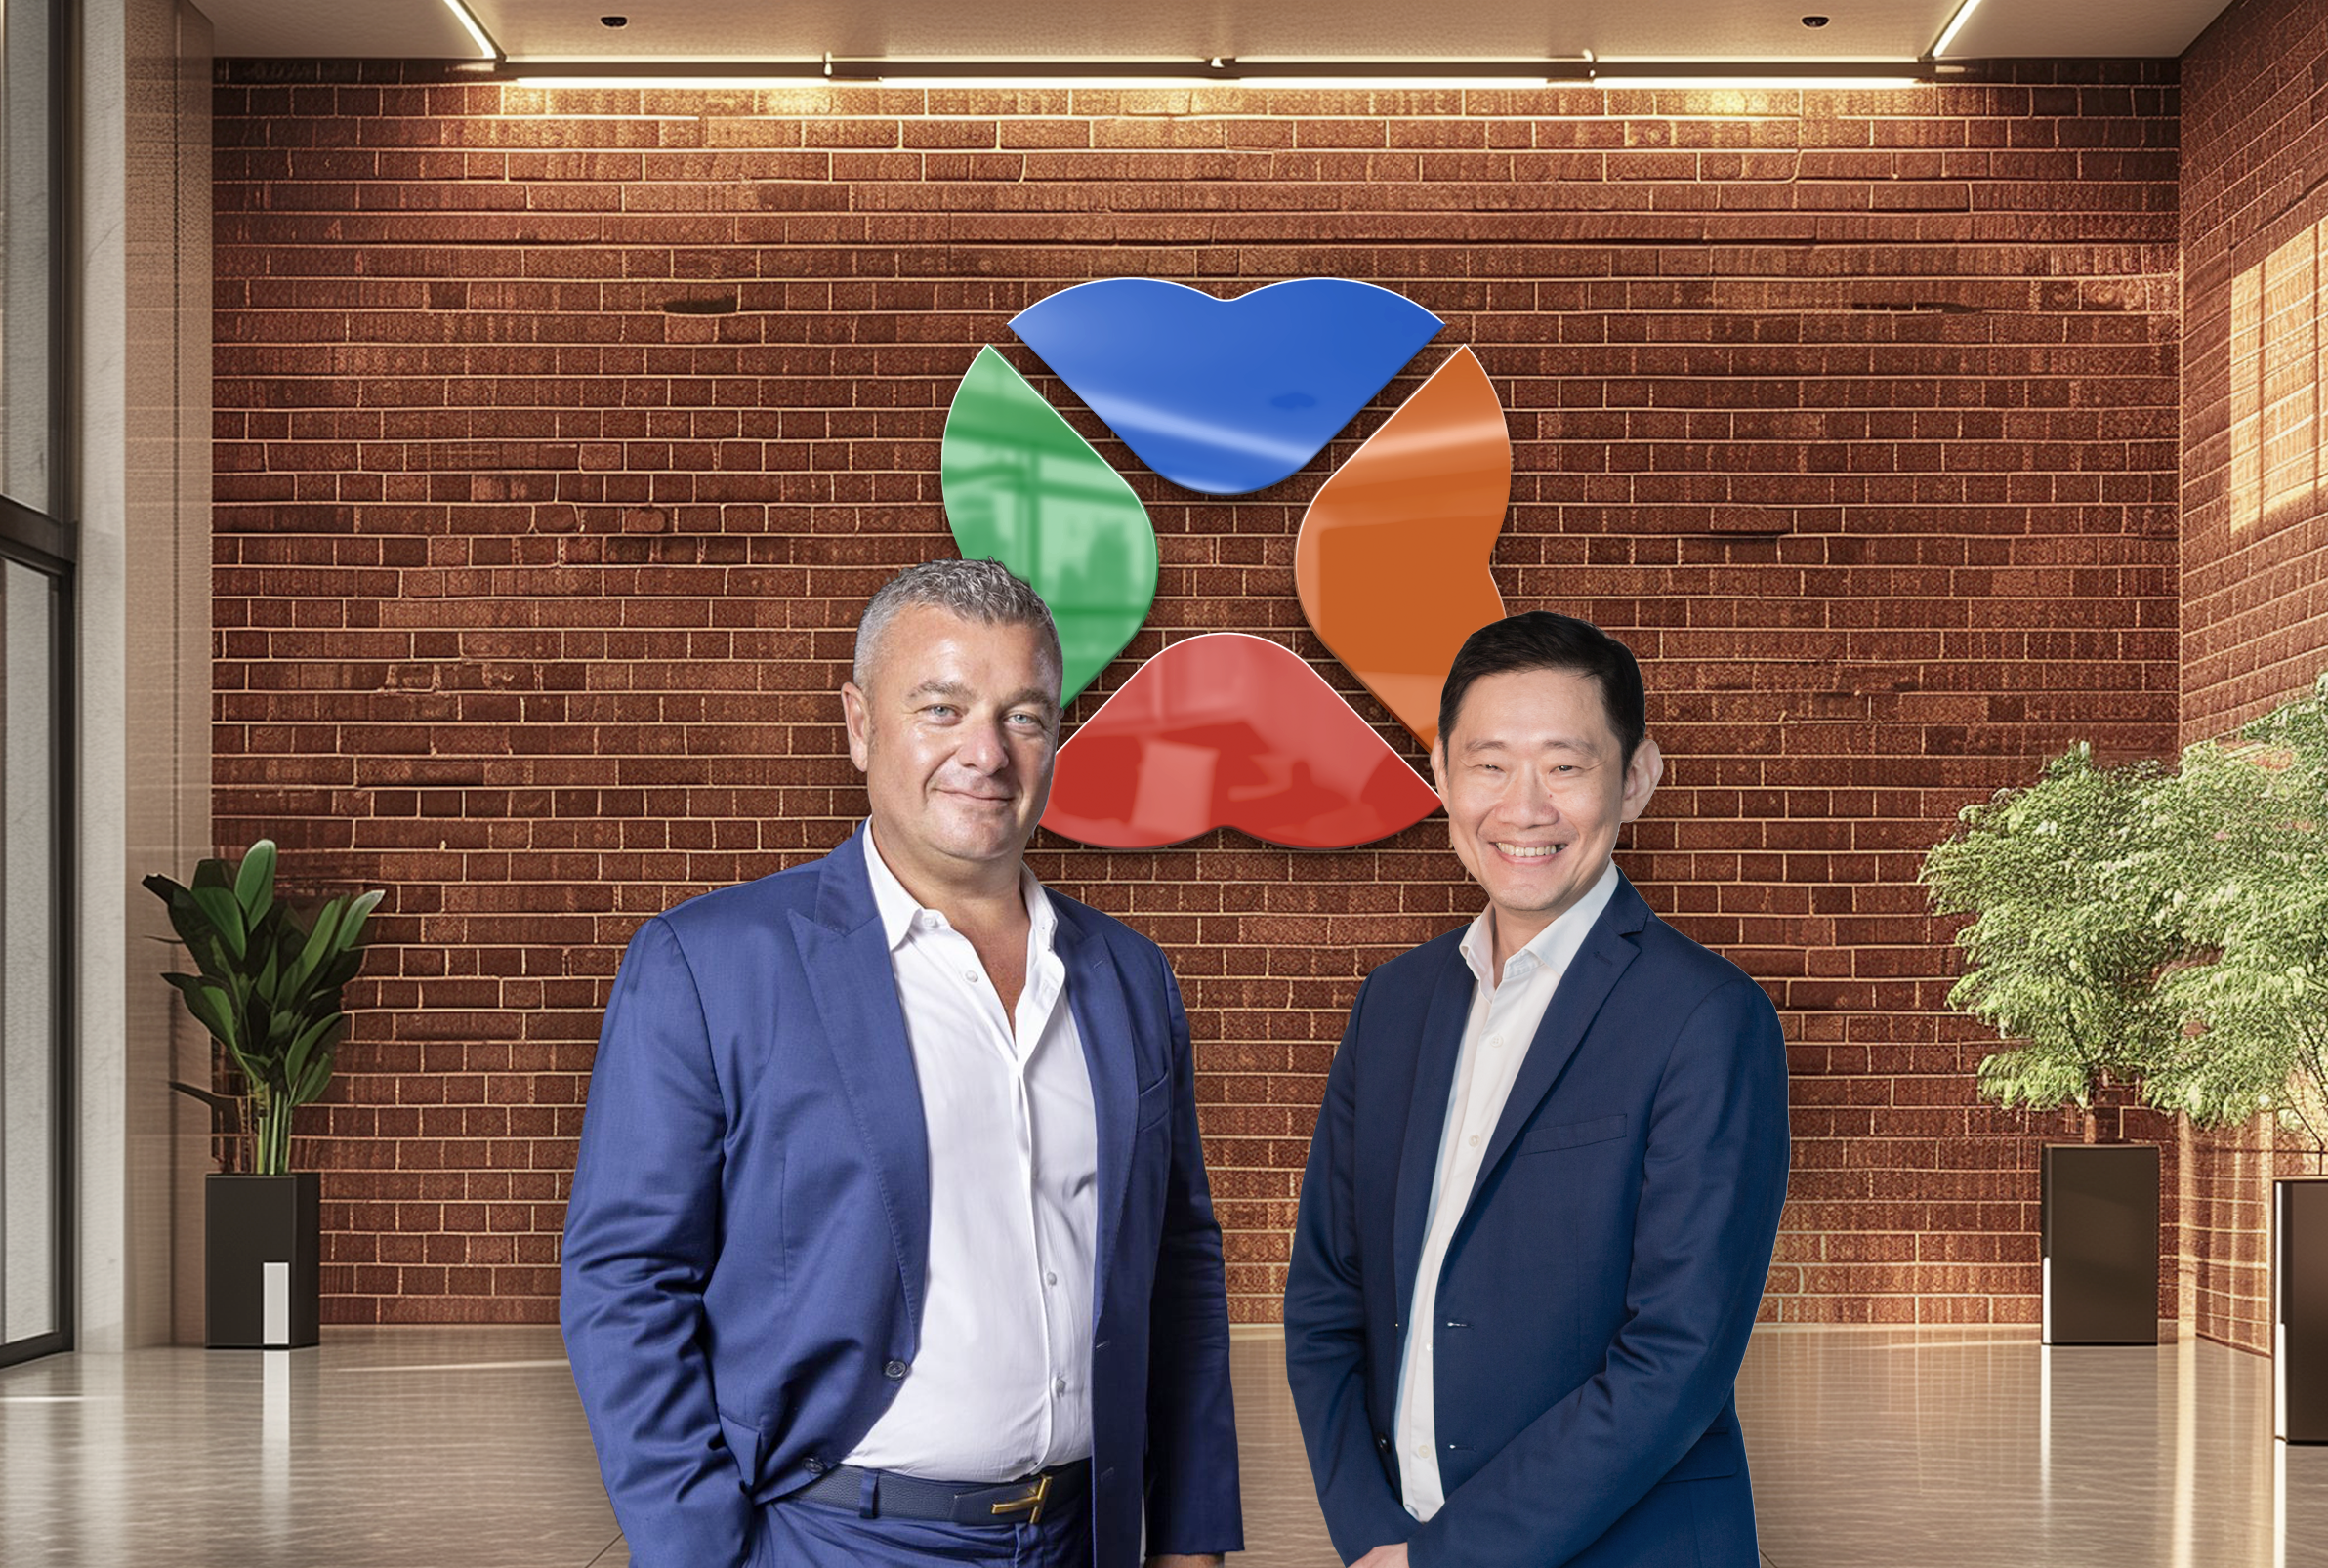 Lakeba CEO Giuseppe Porcelli and new board member Kevin Wo, Microsoft's Managing Director for Global Partner Solutions in the Asia Pacific, posing together to mark Wo's appointment aimed at driving Lakeba's expansion into Southeast Asia.